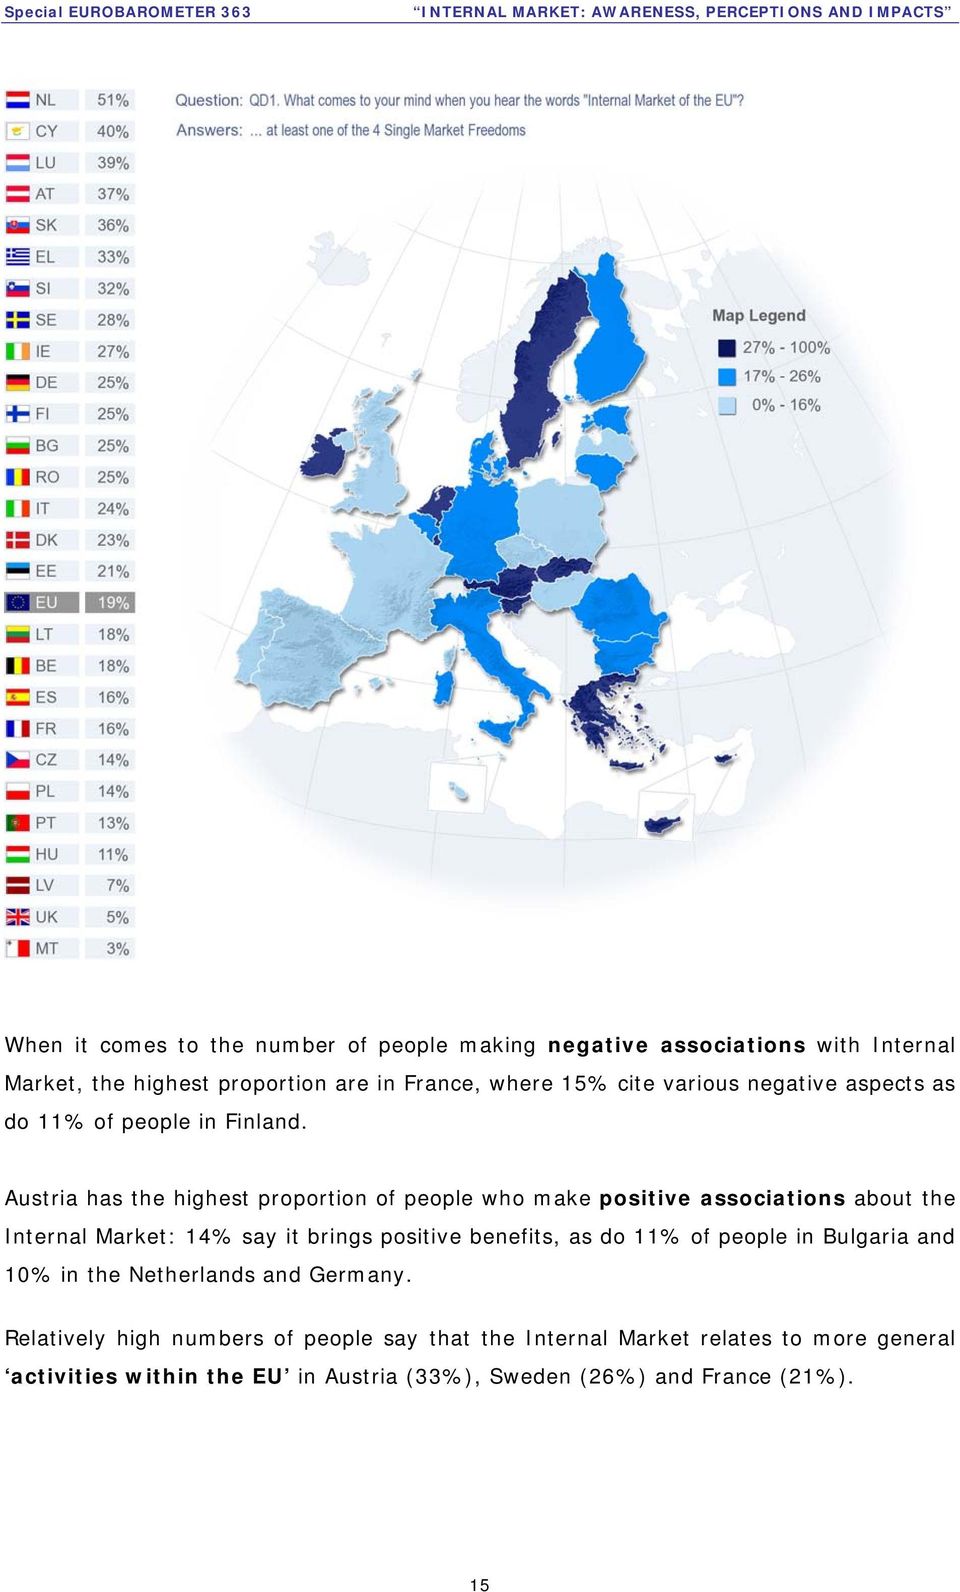 Austria has the highest proportion of people who make positive associations about the Internal Market: 14% say it brings positive benefits, as